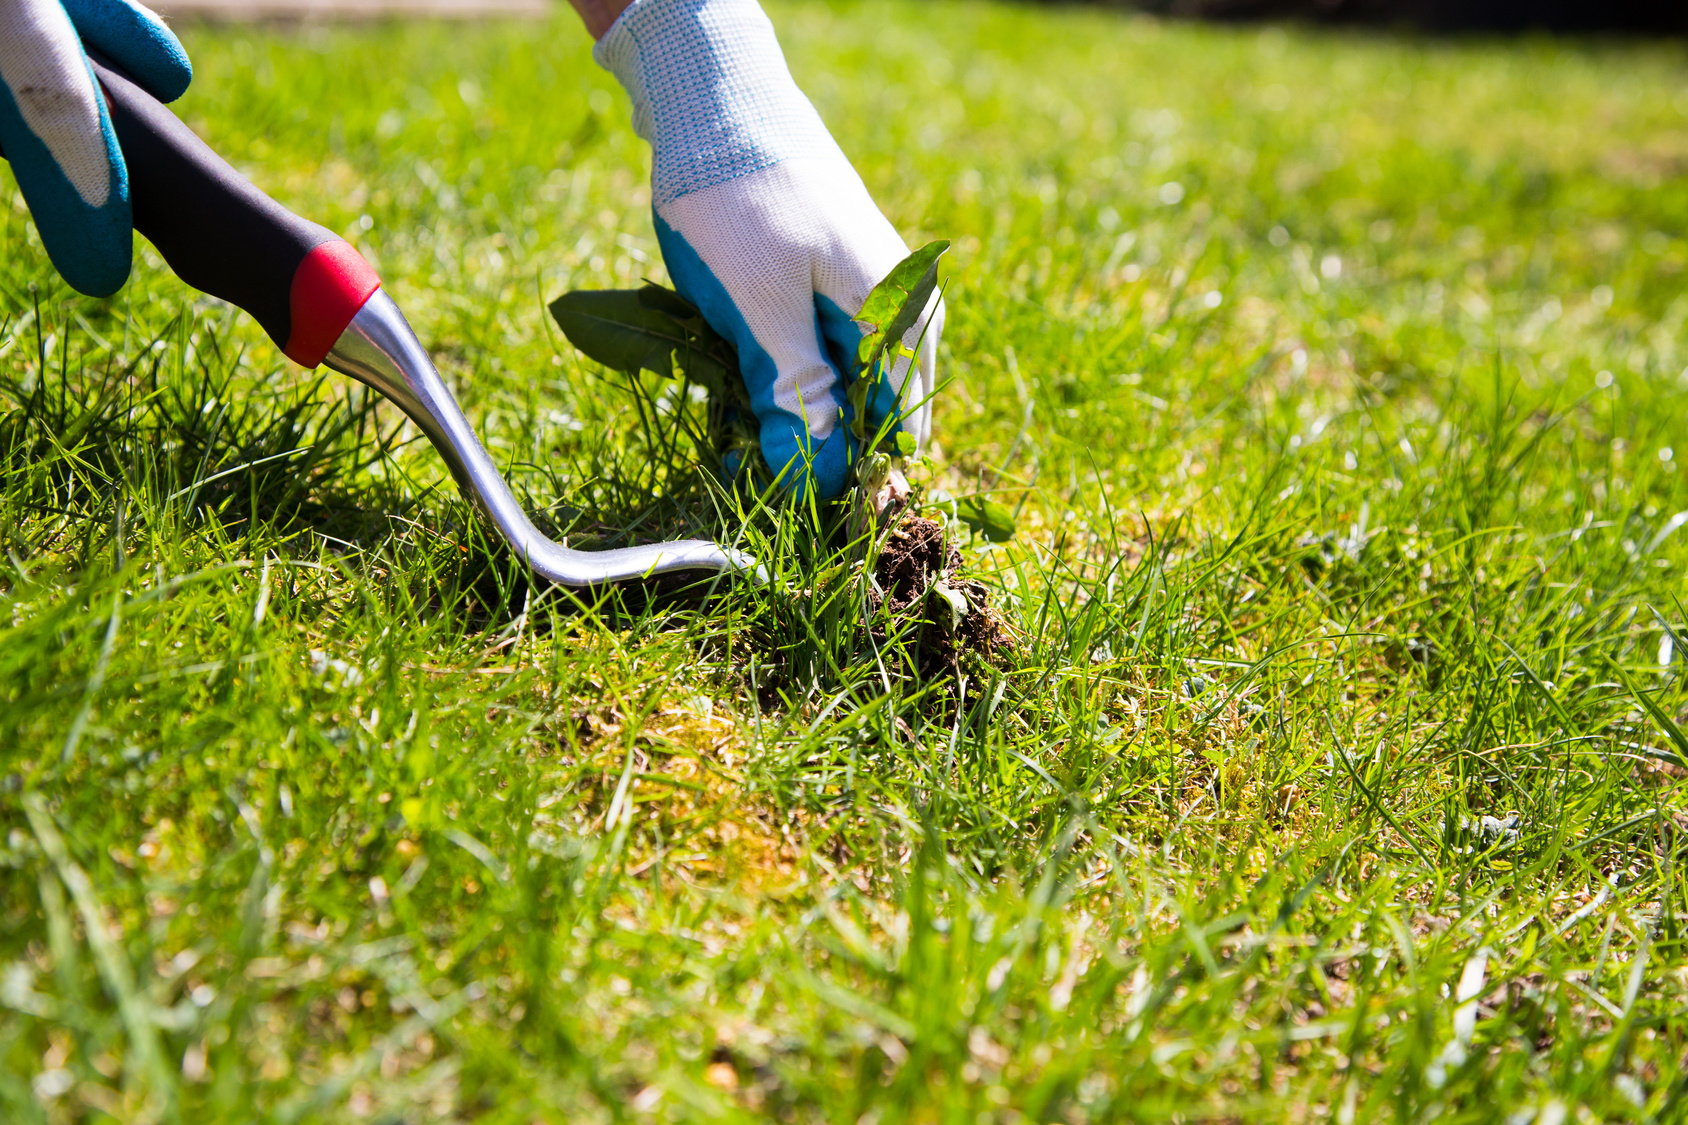 Late Summer Lawn Projects to Consider